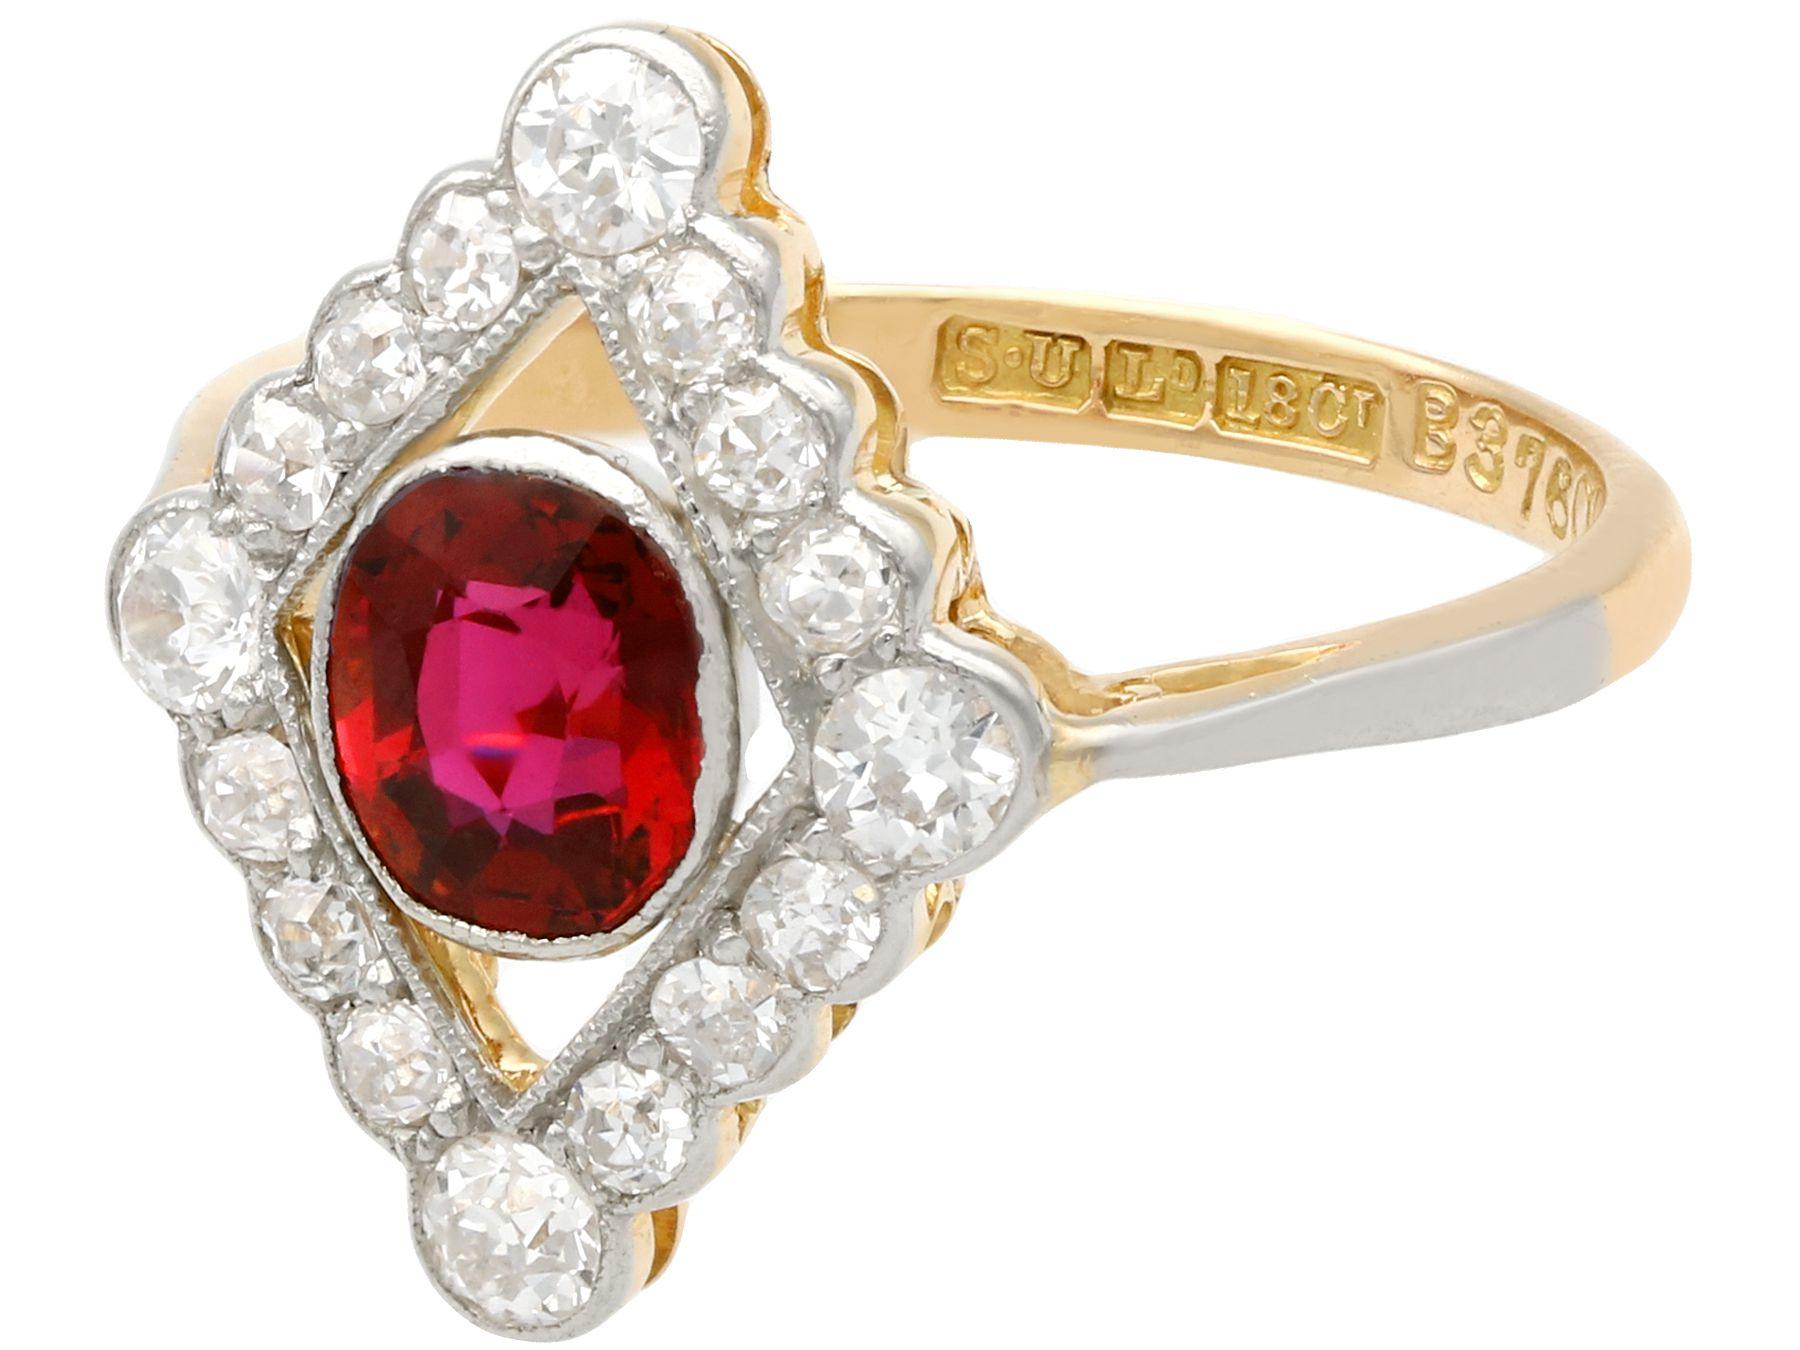 Round Cut 1.20 Carat Siam Ruby and 1.09 Carat Diamond Yellow Gold Ring Antique, 1920s